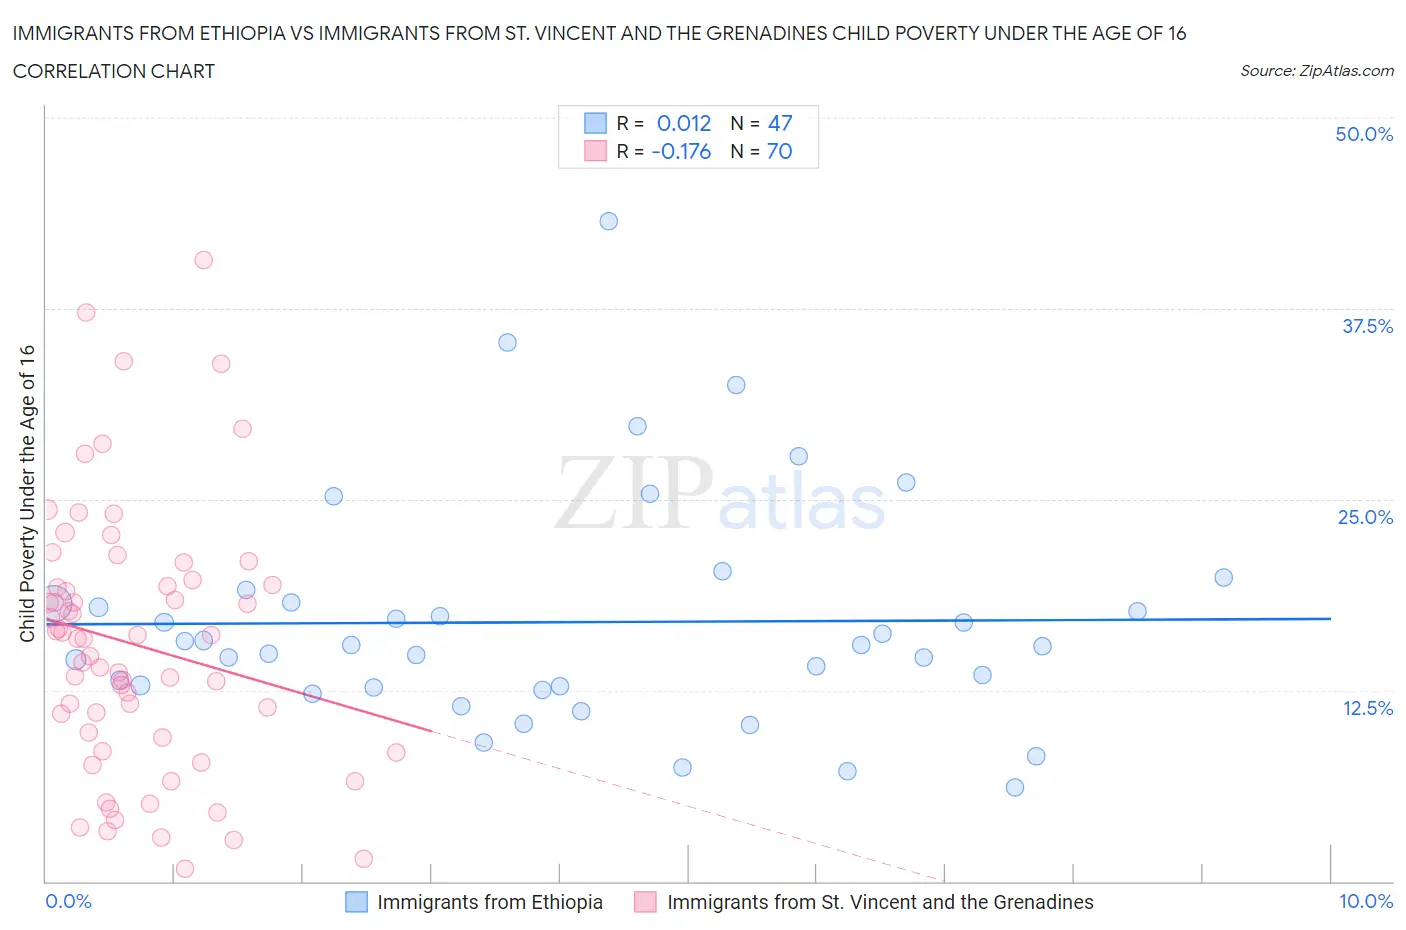 Immigrants from Ethiopia vs Immigrants from St. Vincent and the Grenadines Child Poverty Under the Age of 16